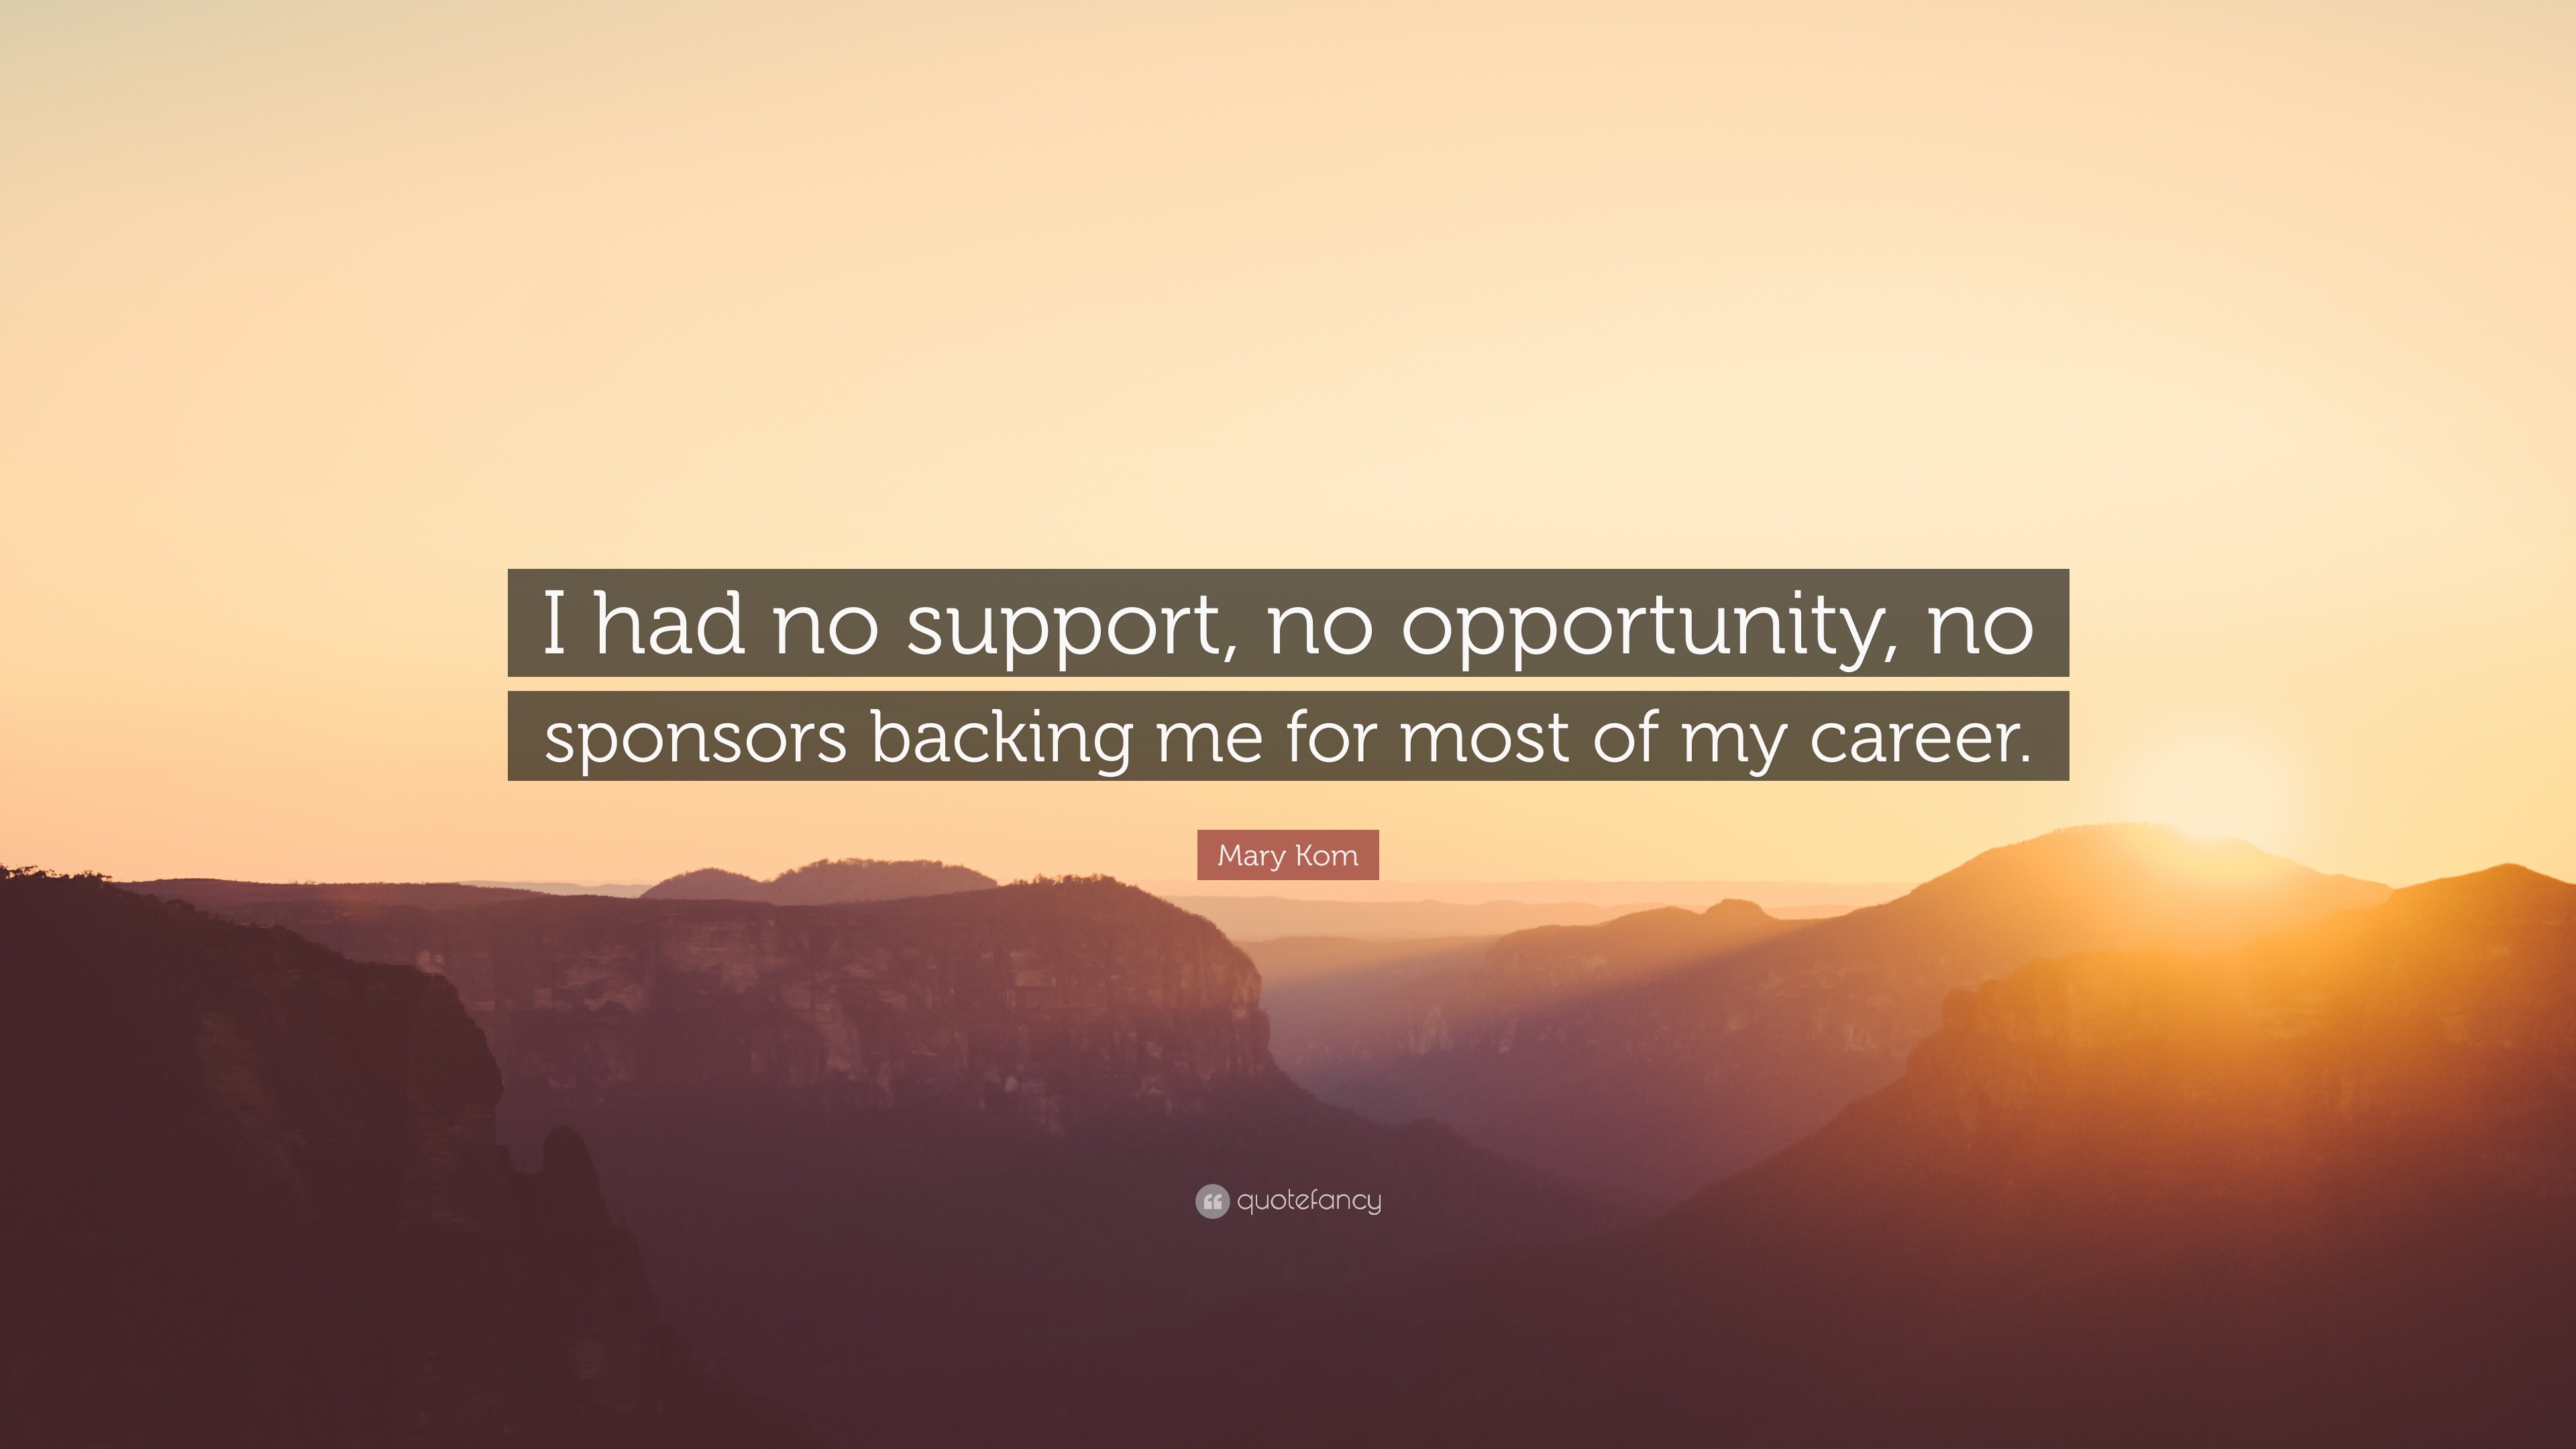 Mary Kom Quote: “I had no support, no opportunity, no sponsors backing me  for most of